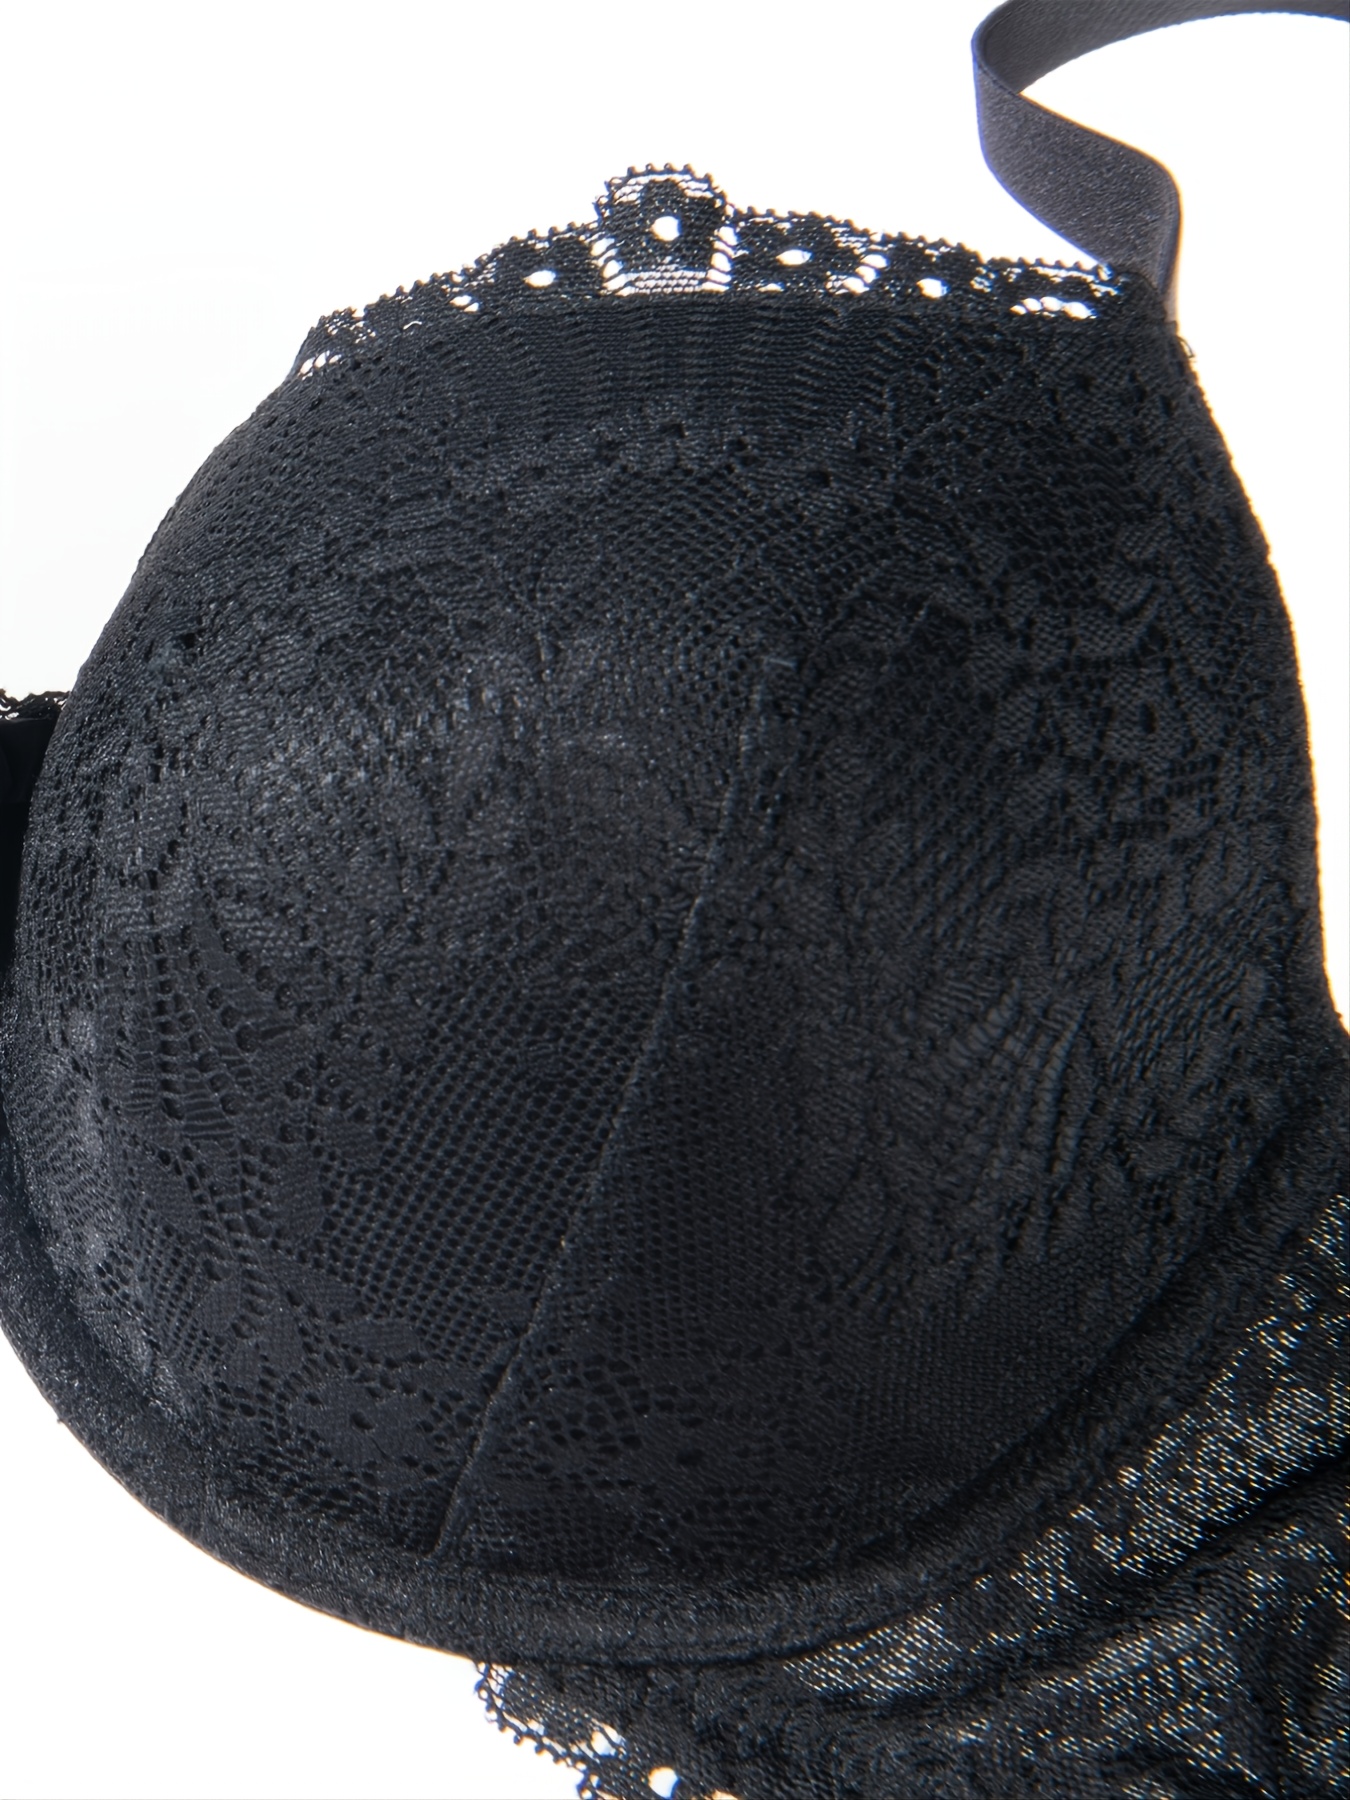 Cheap Sexy Lace Bras for Women Push Up Bra Plus Size Underwire